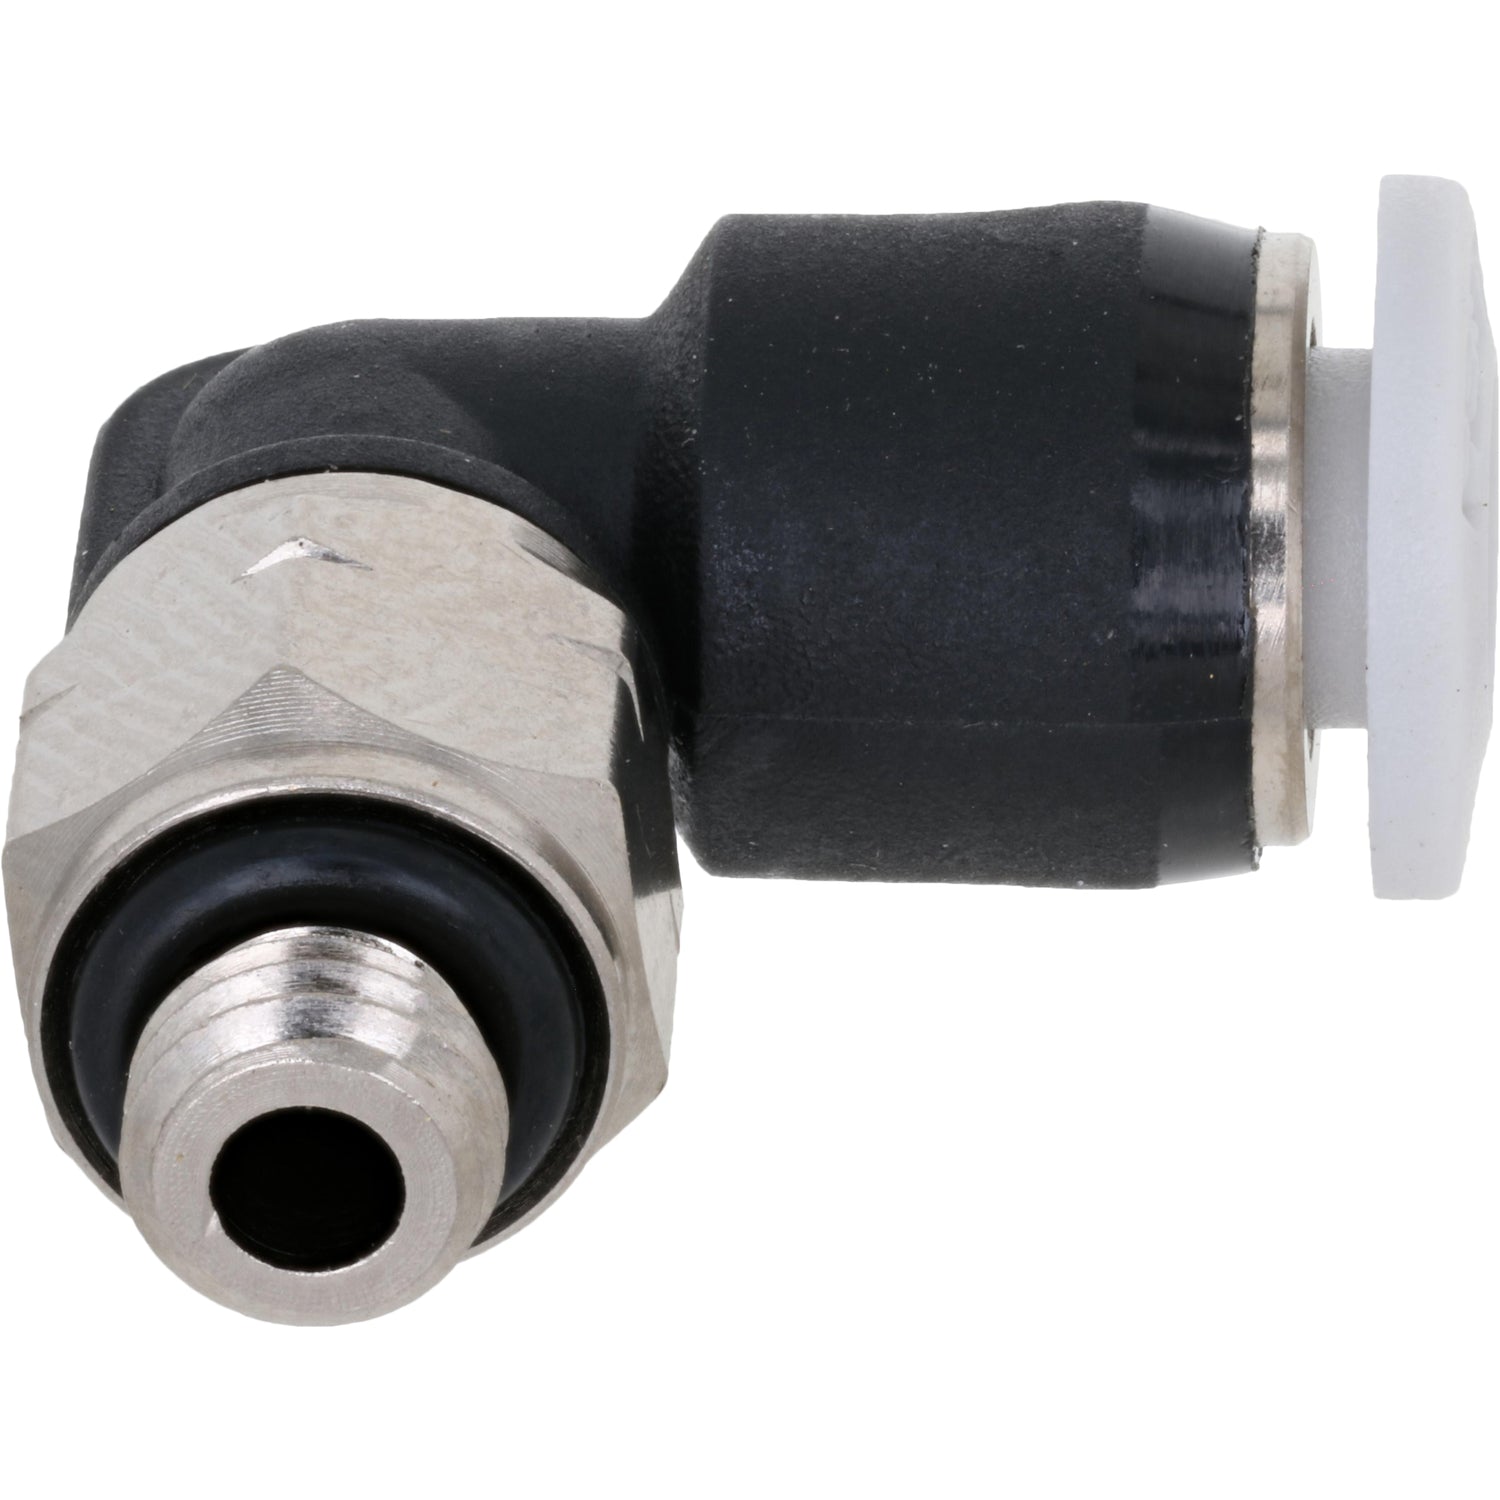 Black and grey L shaped push connect fitting with stainless steel mounting flats and 10-32 threads shown on white background. 